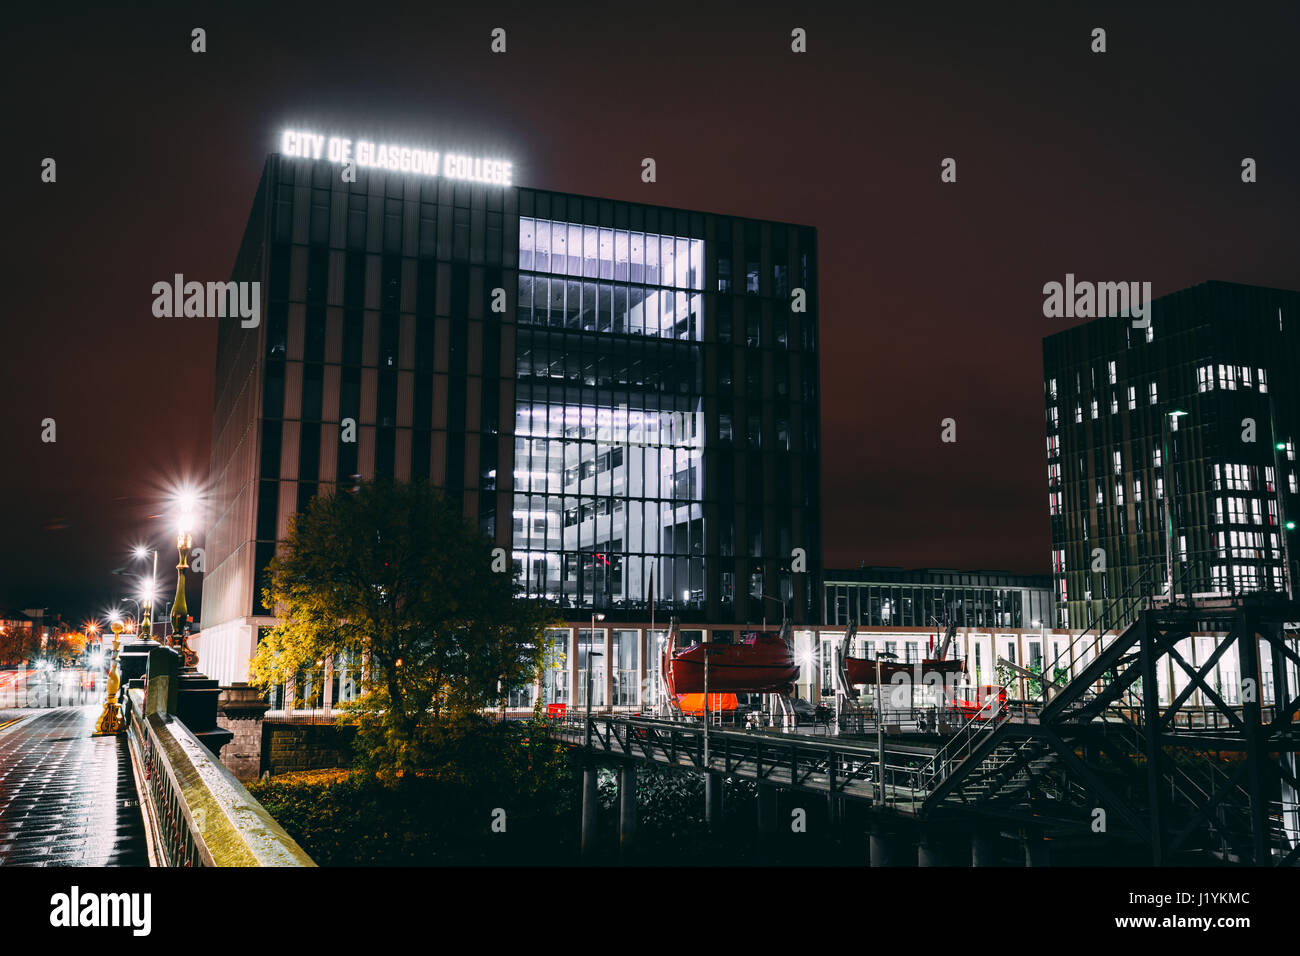 The City of Glasgow College, Riverside Campus at night. Stock Photo